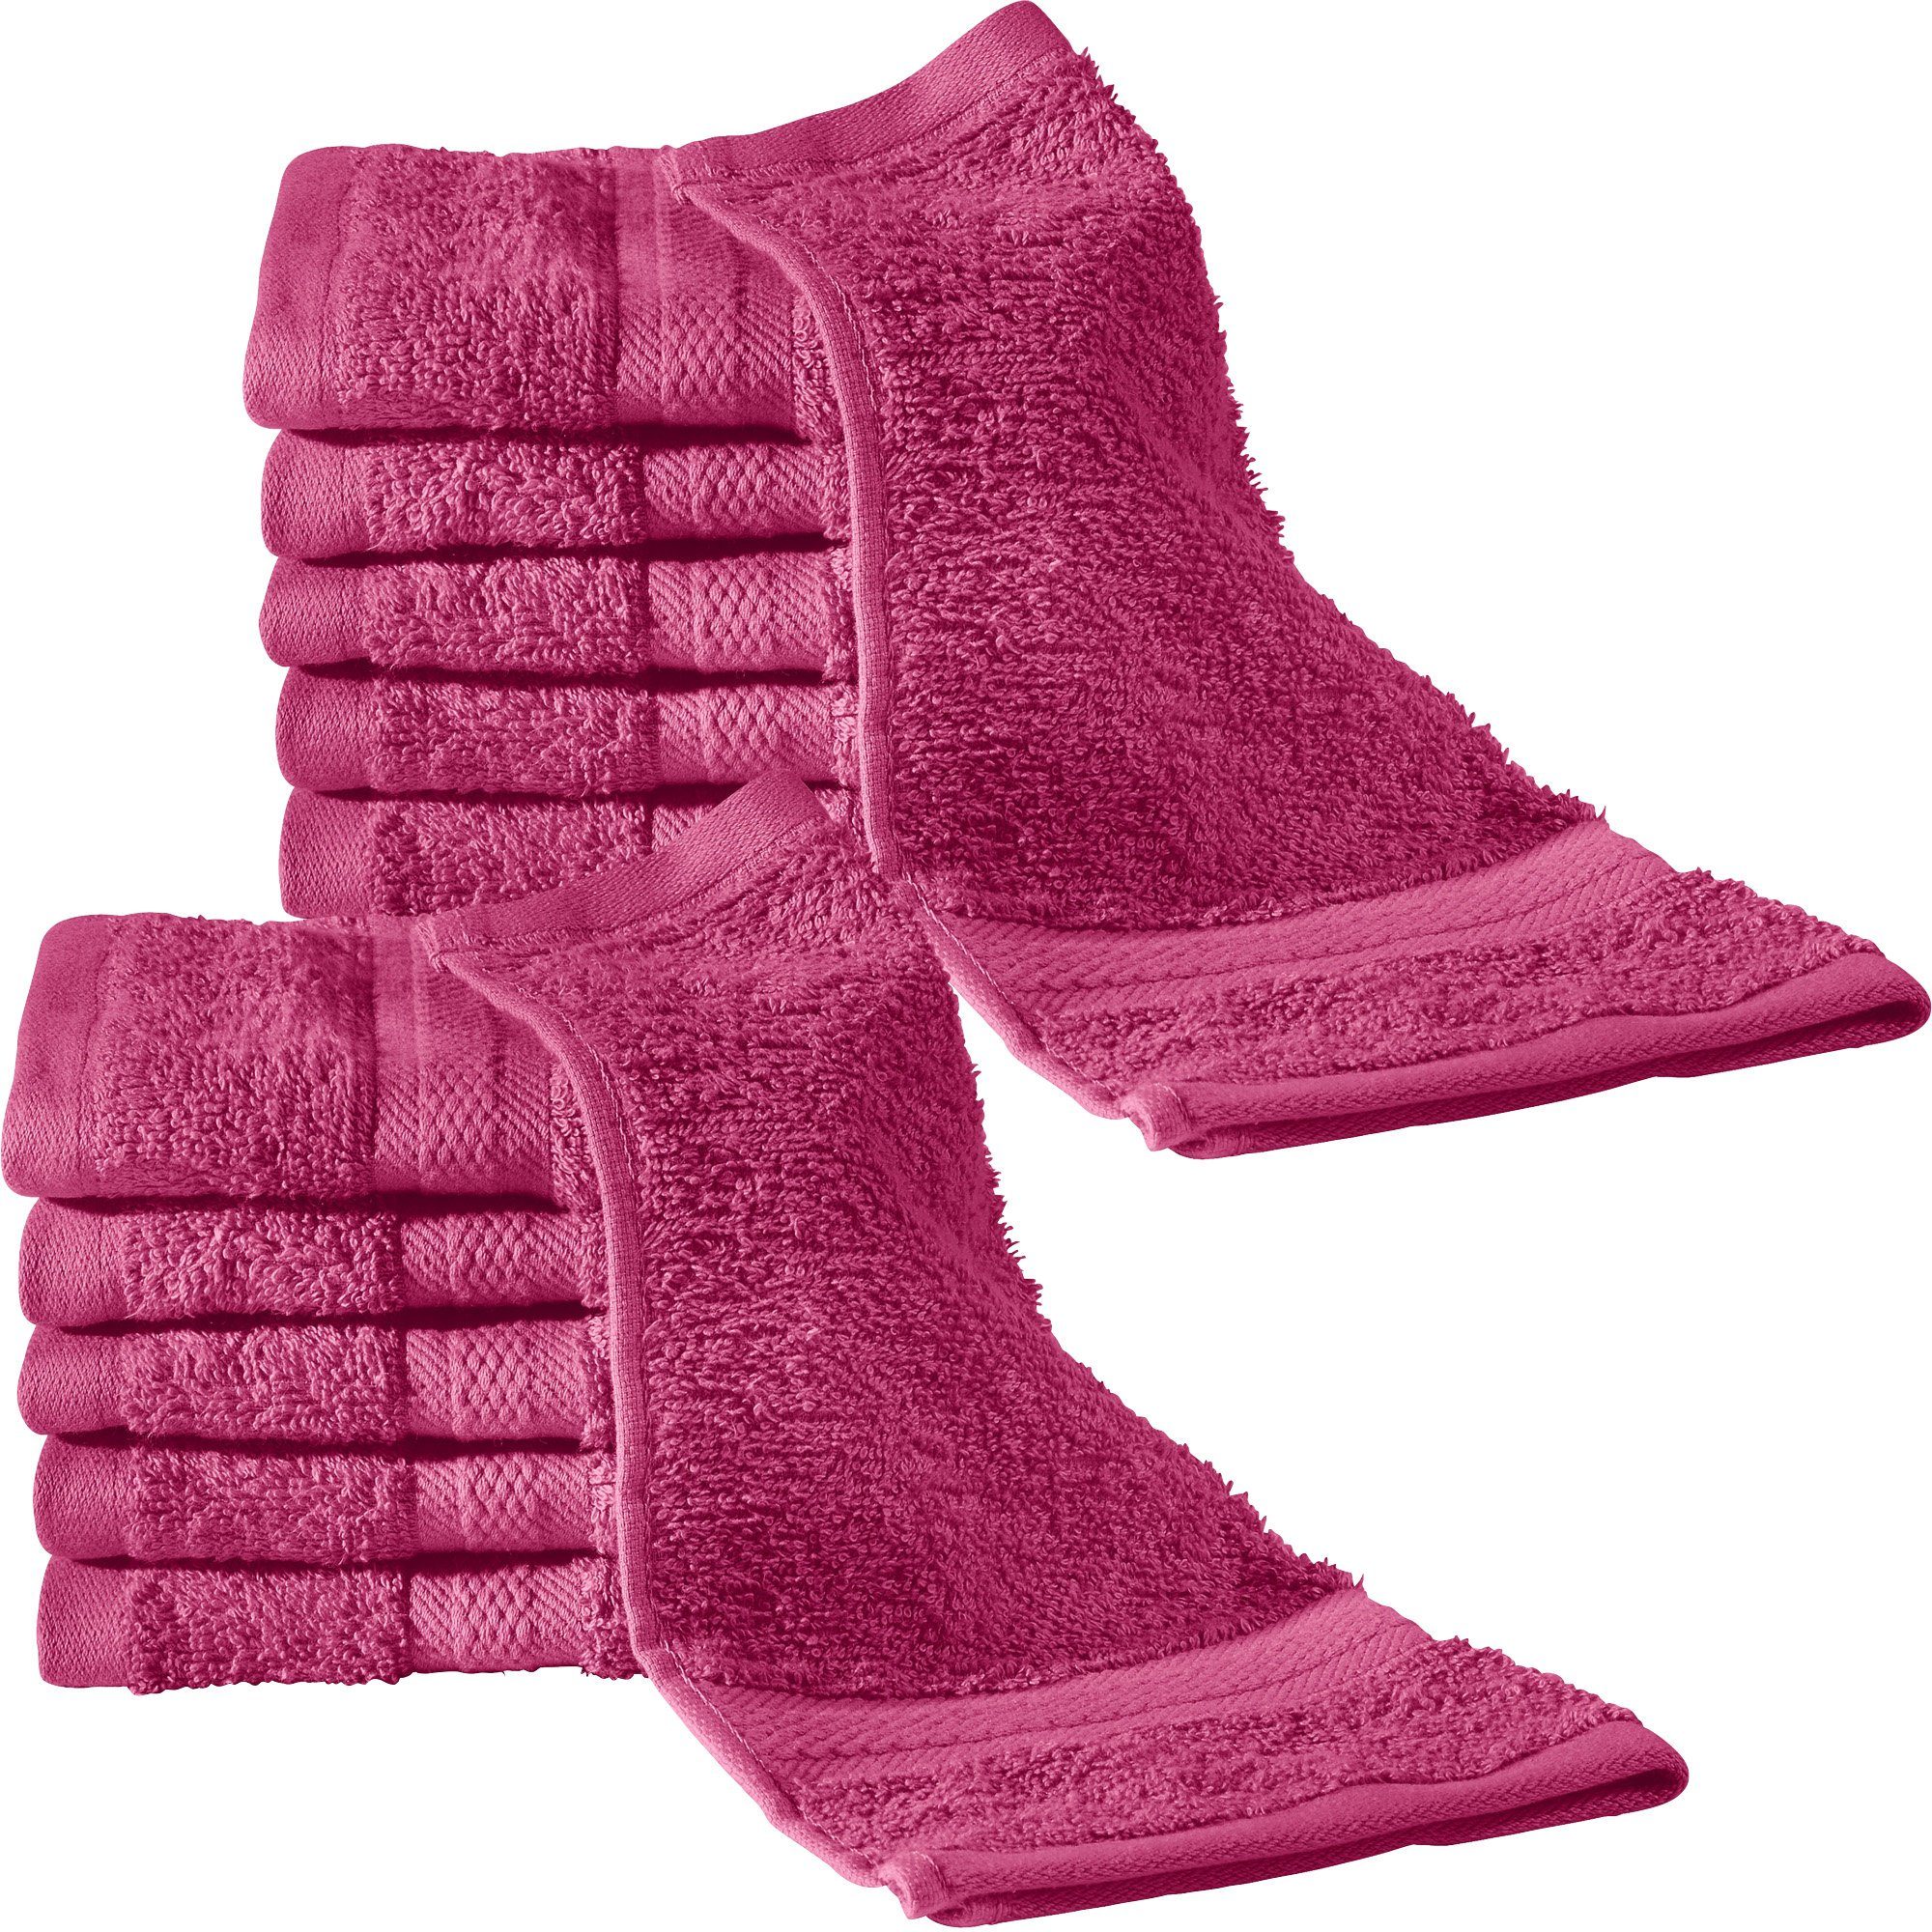 fuchsia Walk-Frottier Seiftuch 12er-Pack (12-tlg), Seiftuch REDBEST Uni "Chicago"